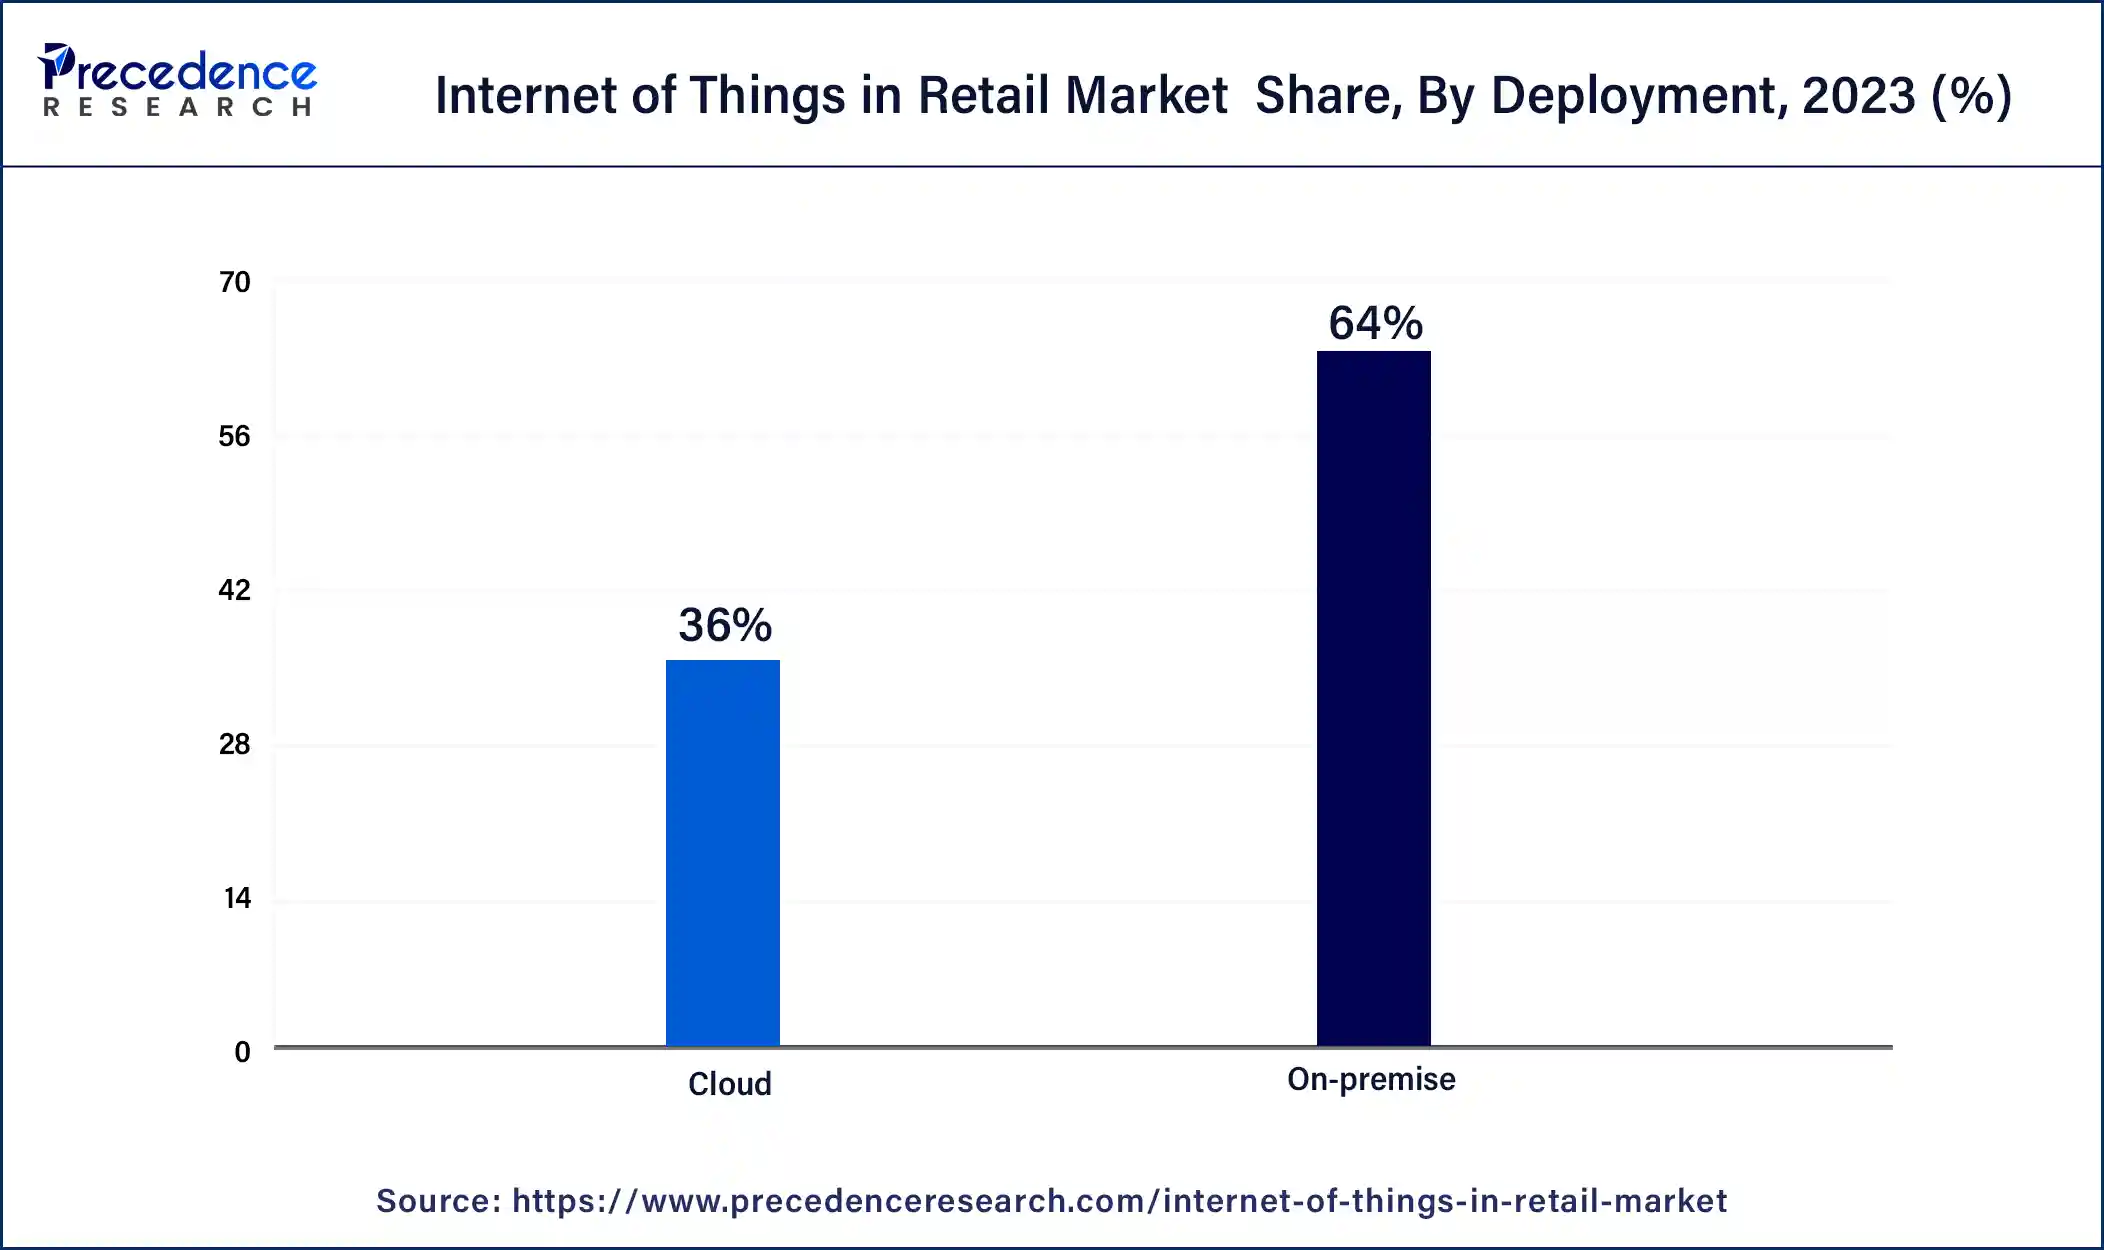 Internet of Things in Retail Market Share, By Deployment, 2023 (%)